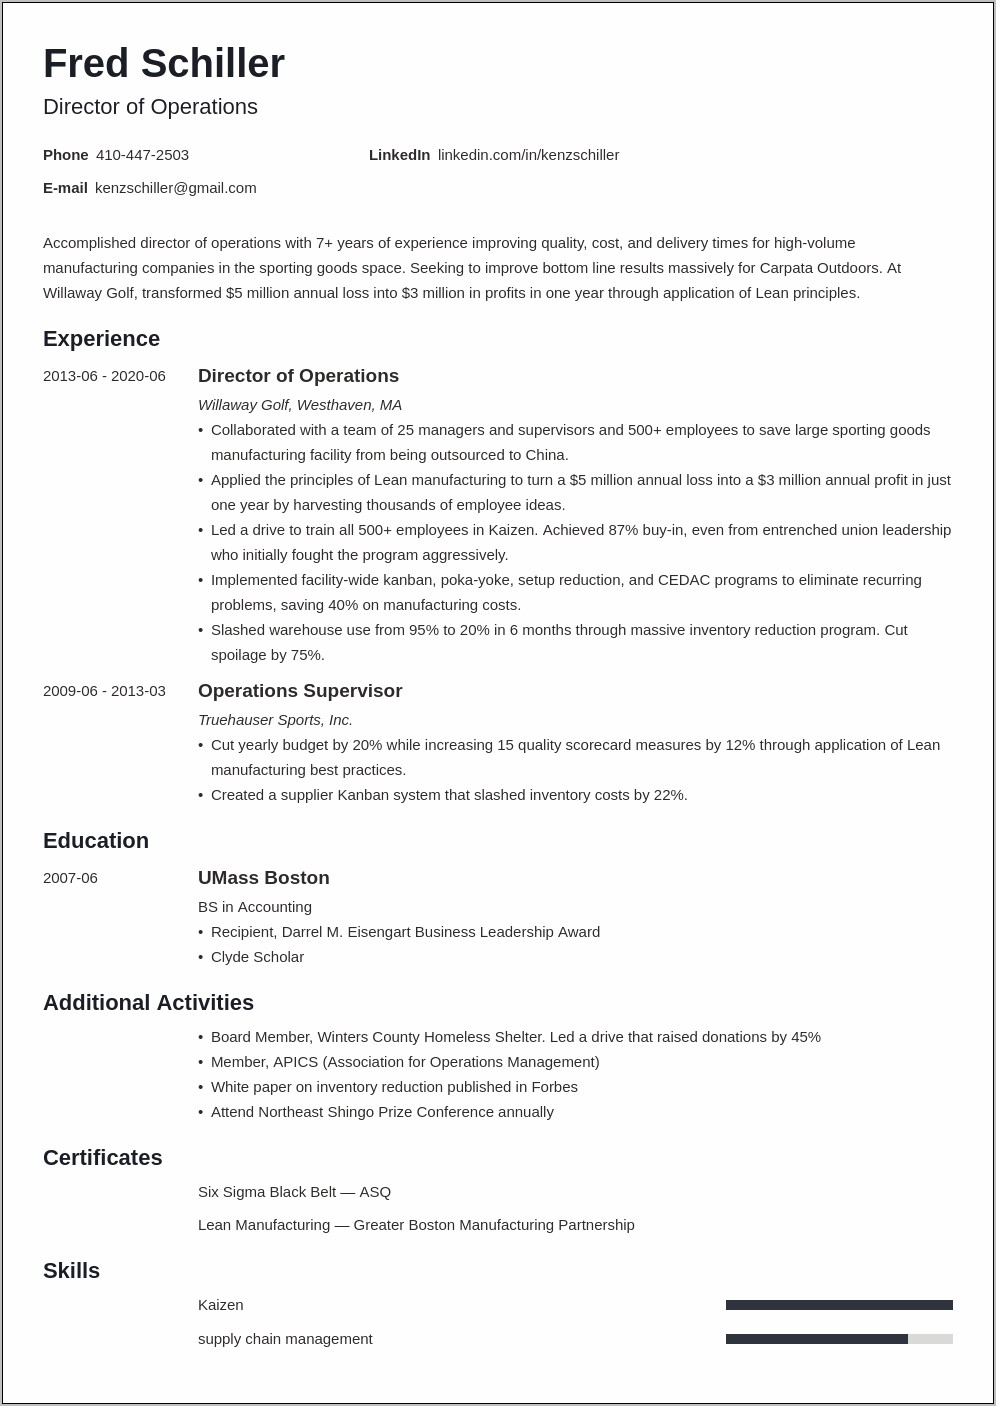 Sample Resume Of Director Of Operations